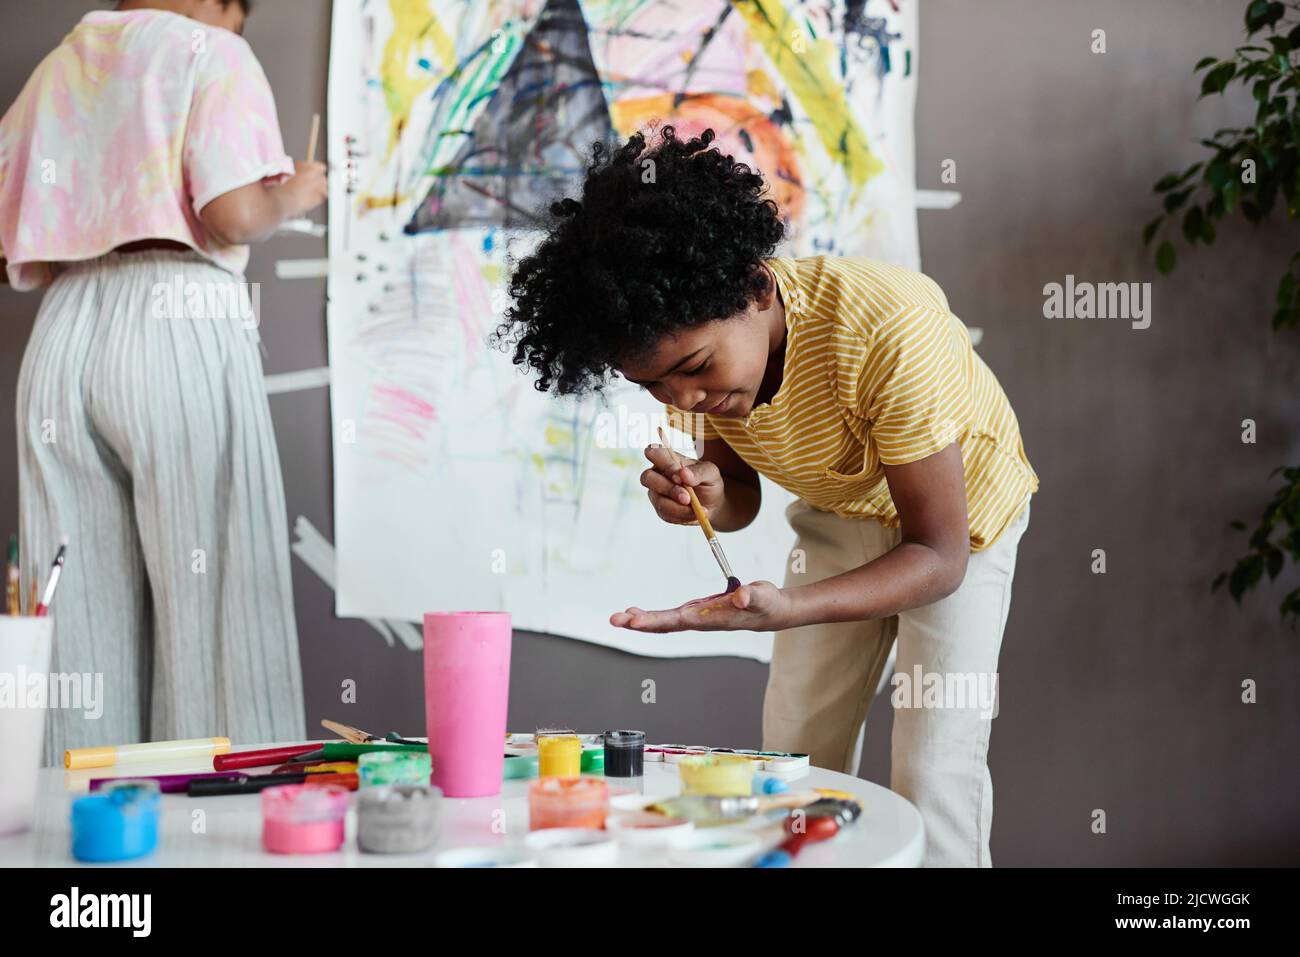 African little boy mixing colors on his hand with paintbrush while painting a big picture together with his sister Stock Photo